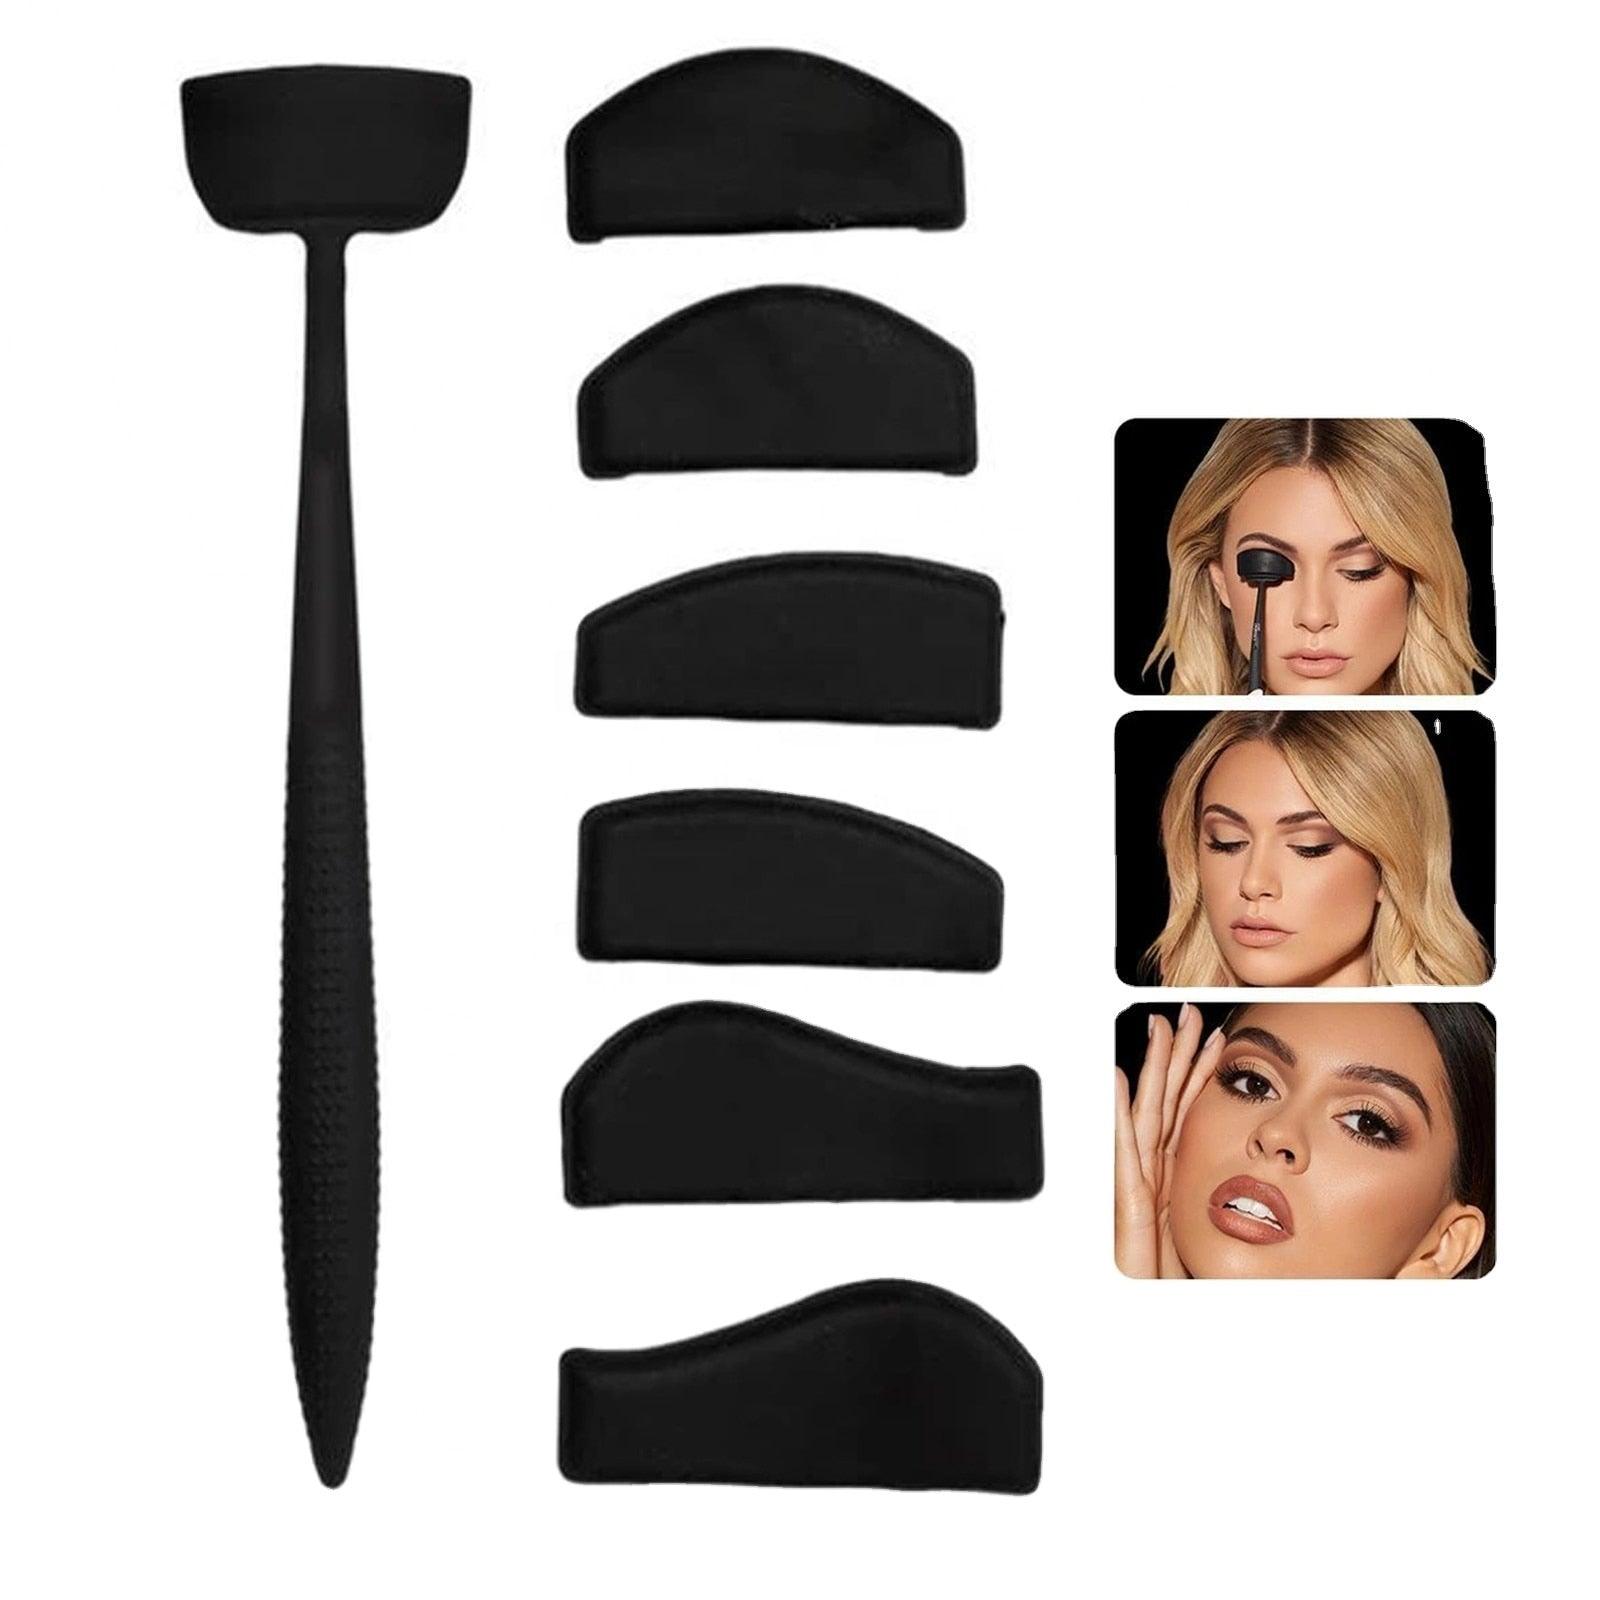 6 in 1 Eyeshadow Stencil Crease Line Kit Lazy Eye shadow Fixer Eyebrow Stamp Seal Molds Cut Crease for Eyes Makeup kit Tool Set - Festa do Desconto